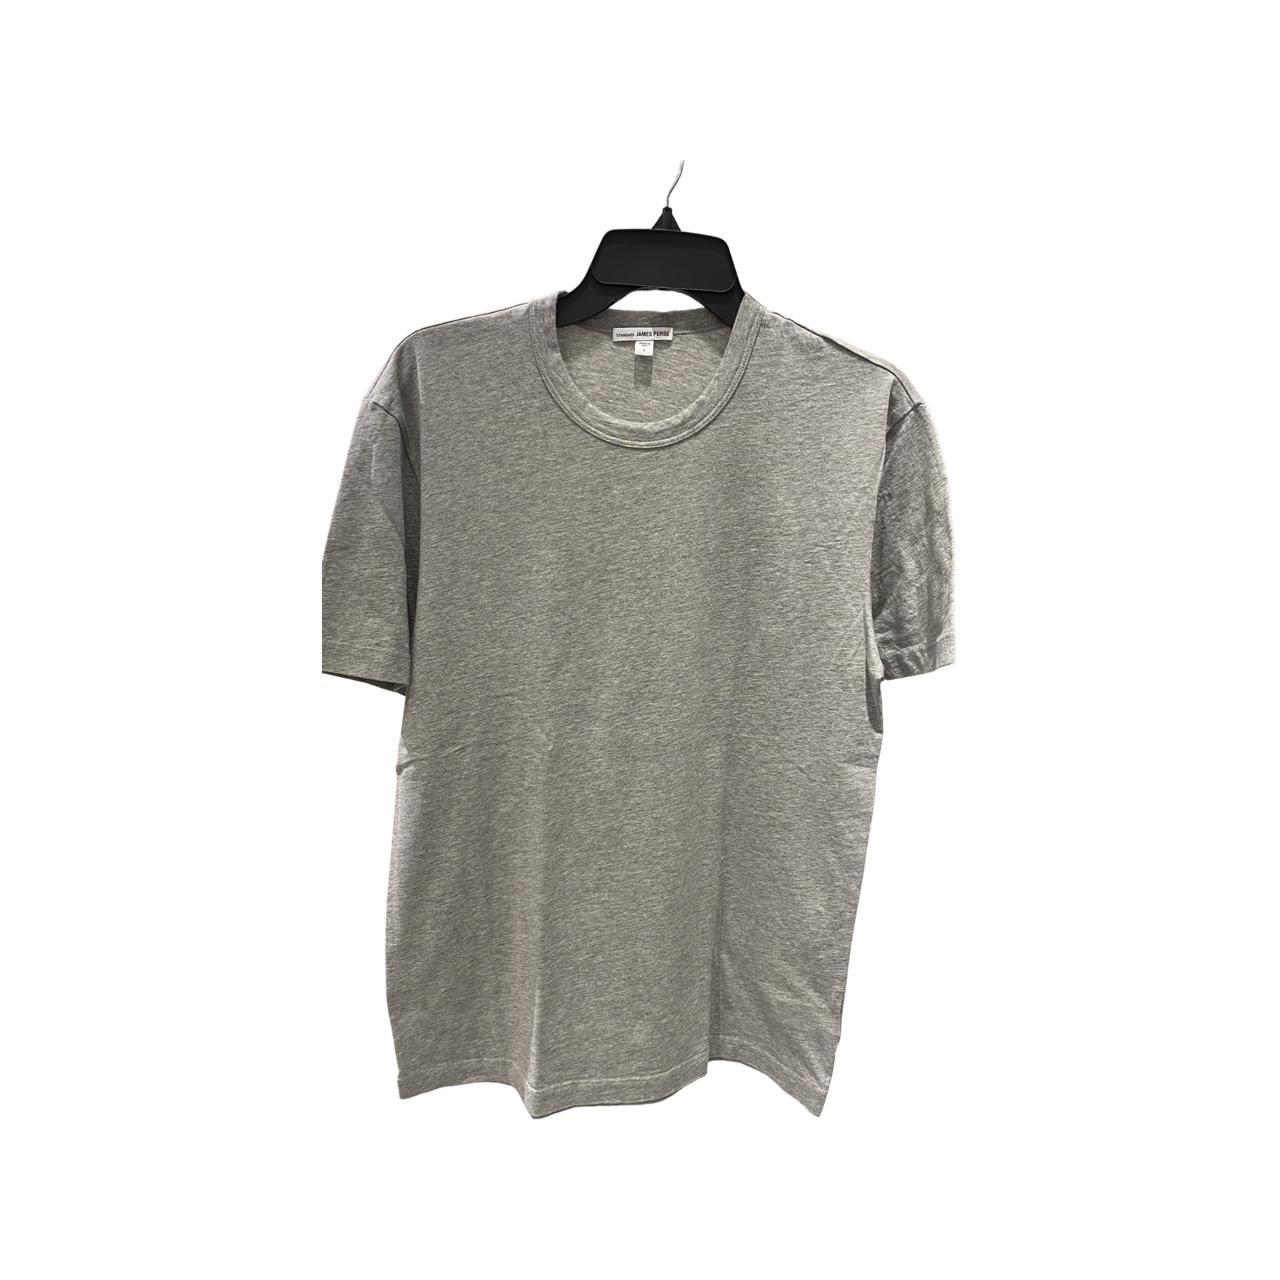 James Perse Men's Grey and Silver T-shirt (2)